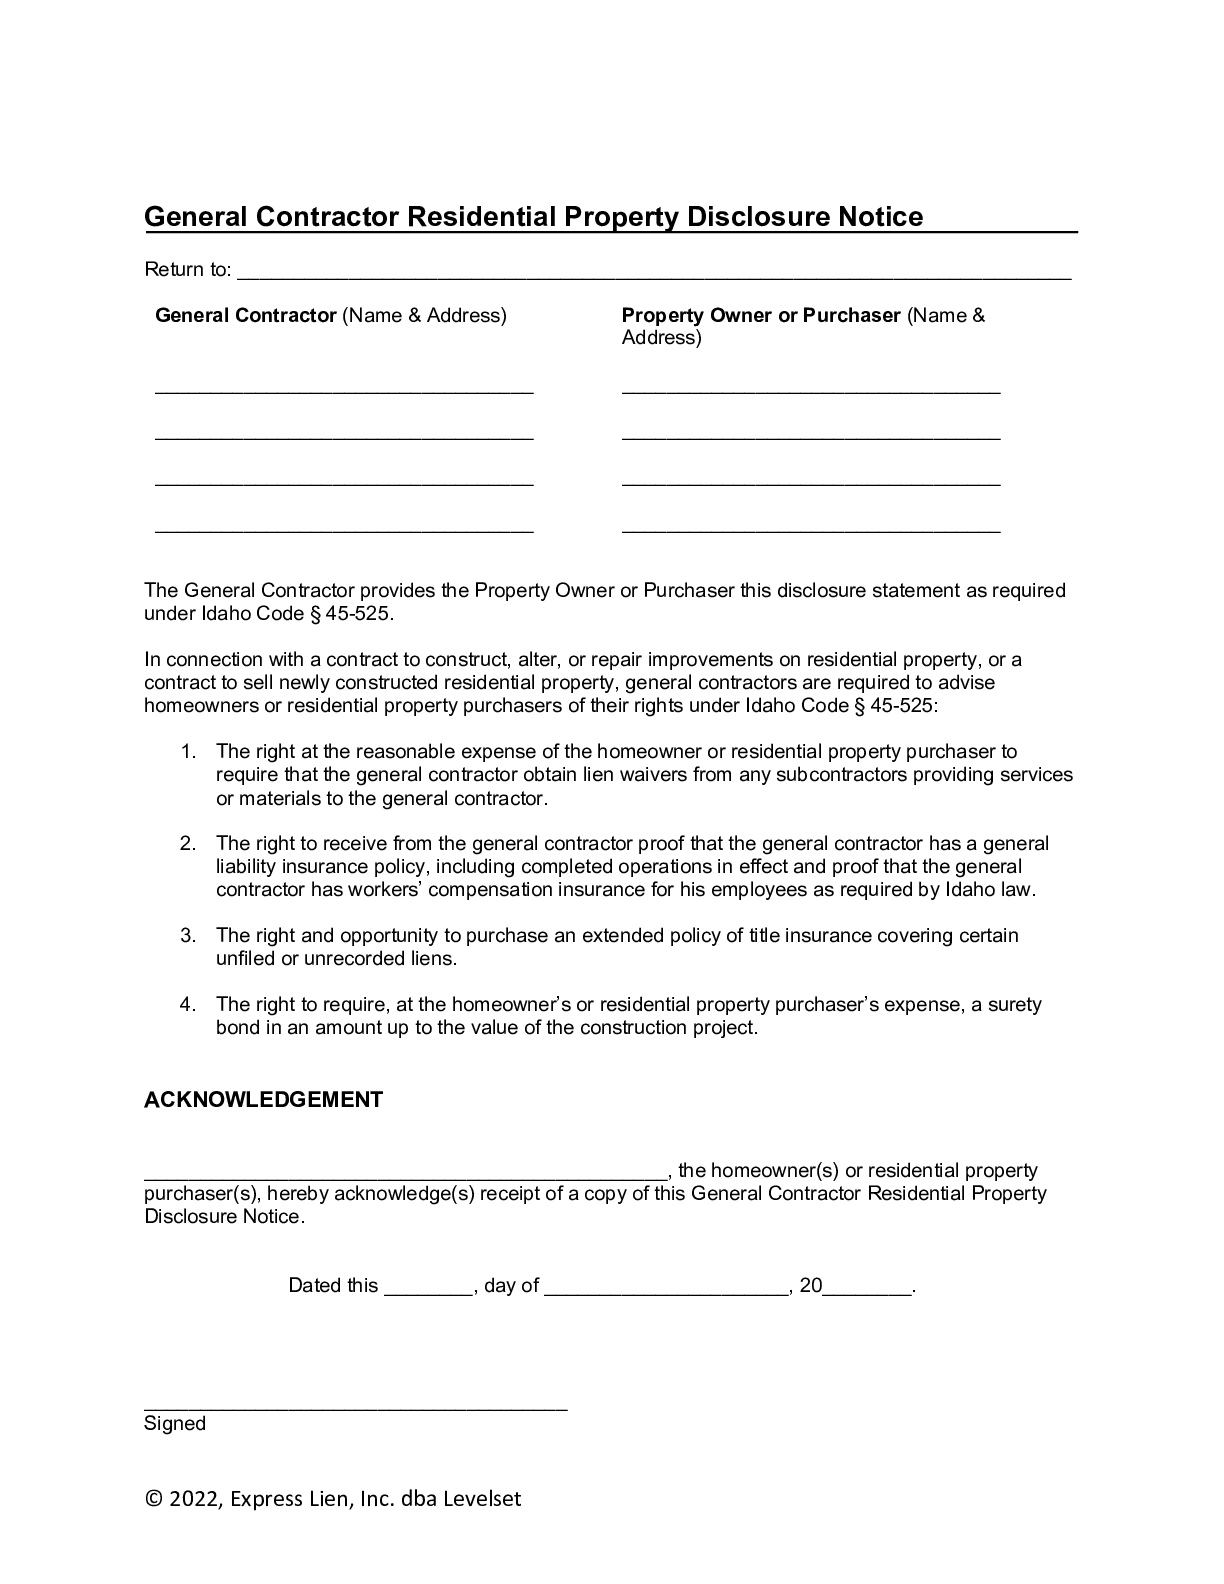 Idaho Residential Disclosure Notice Form - free from